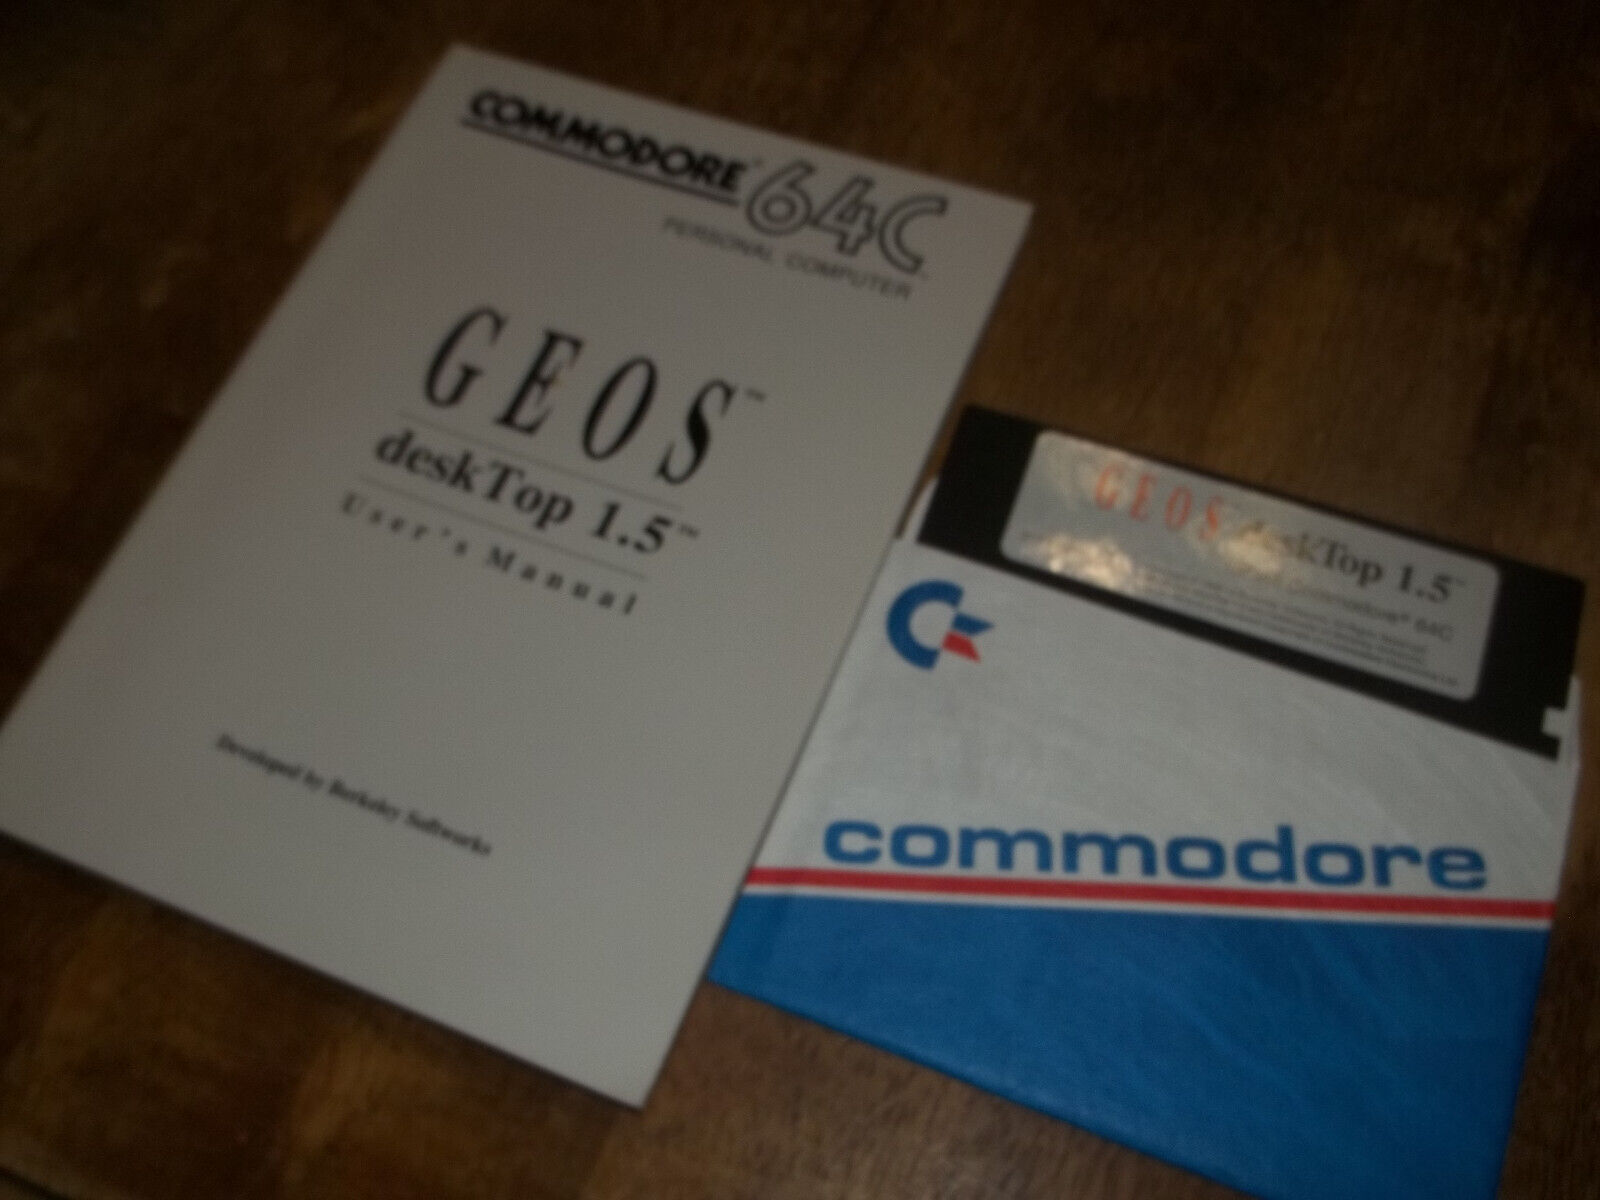 Vintage Commodore 64C GEOS Desktop 1.5 Users Manual, 1988 With Disk